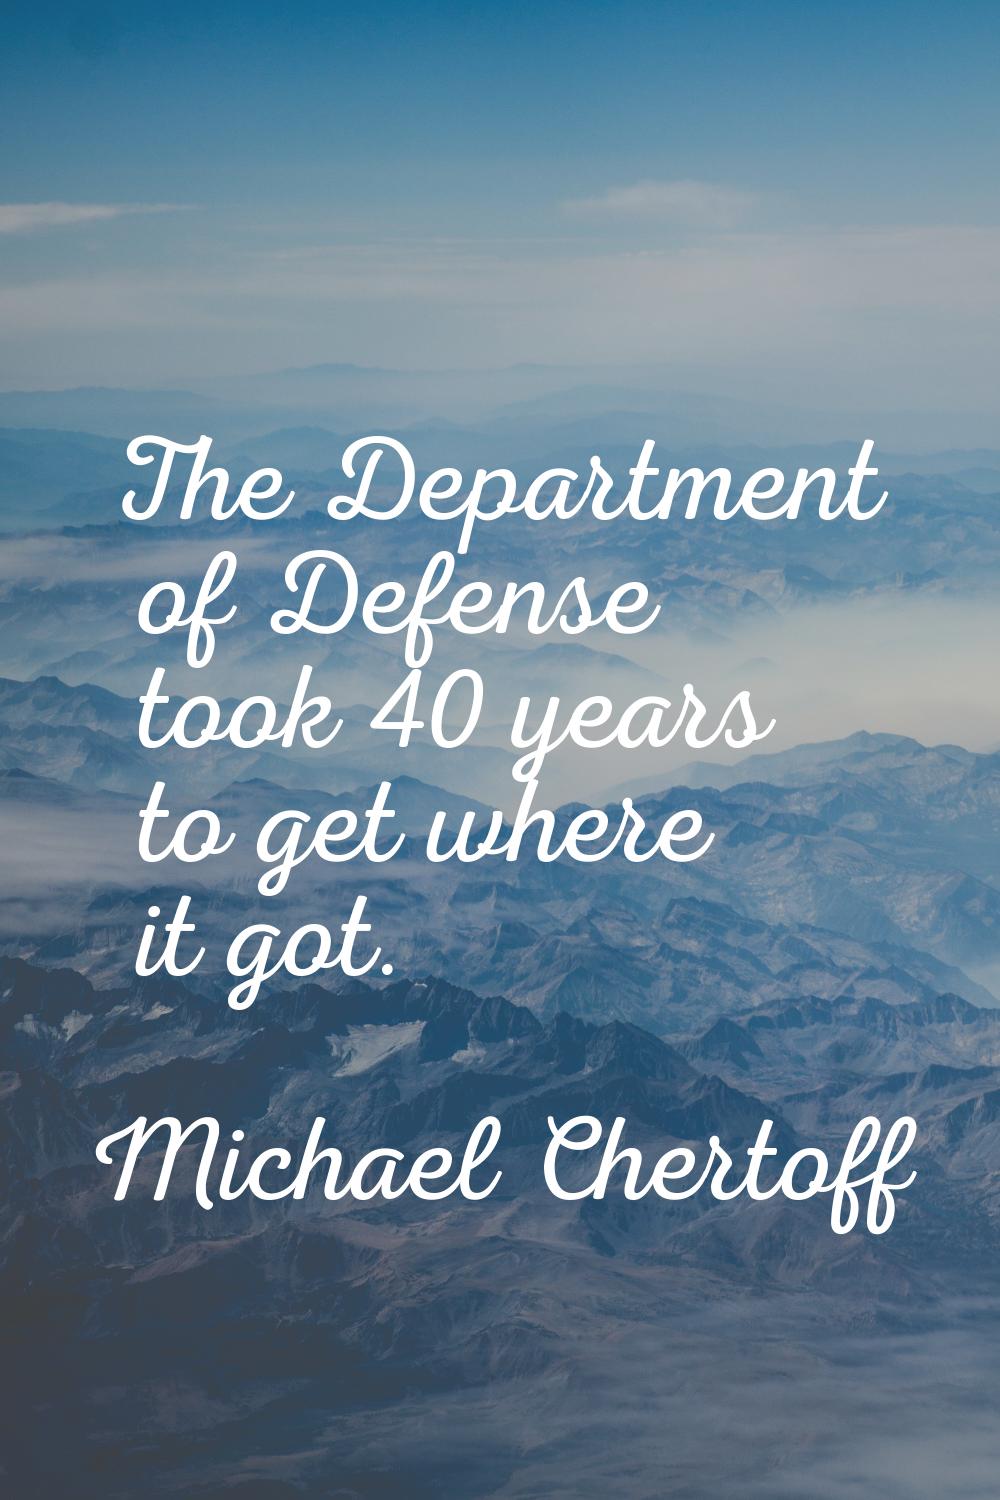 The Department of Defense took 40 years to get where it got.